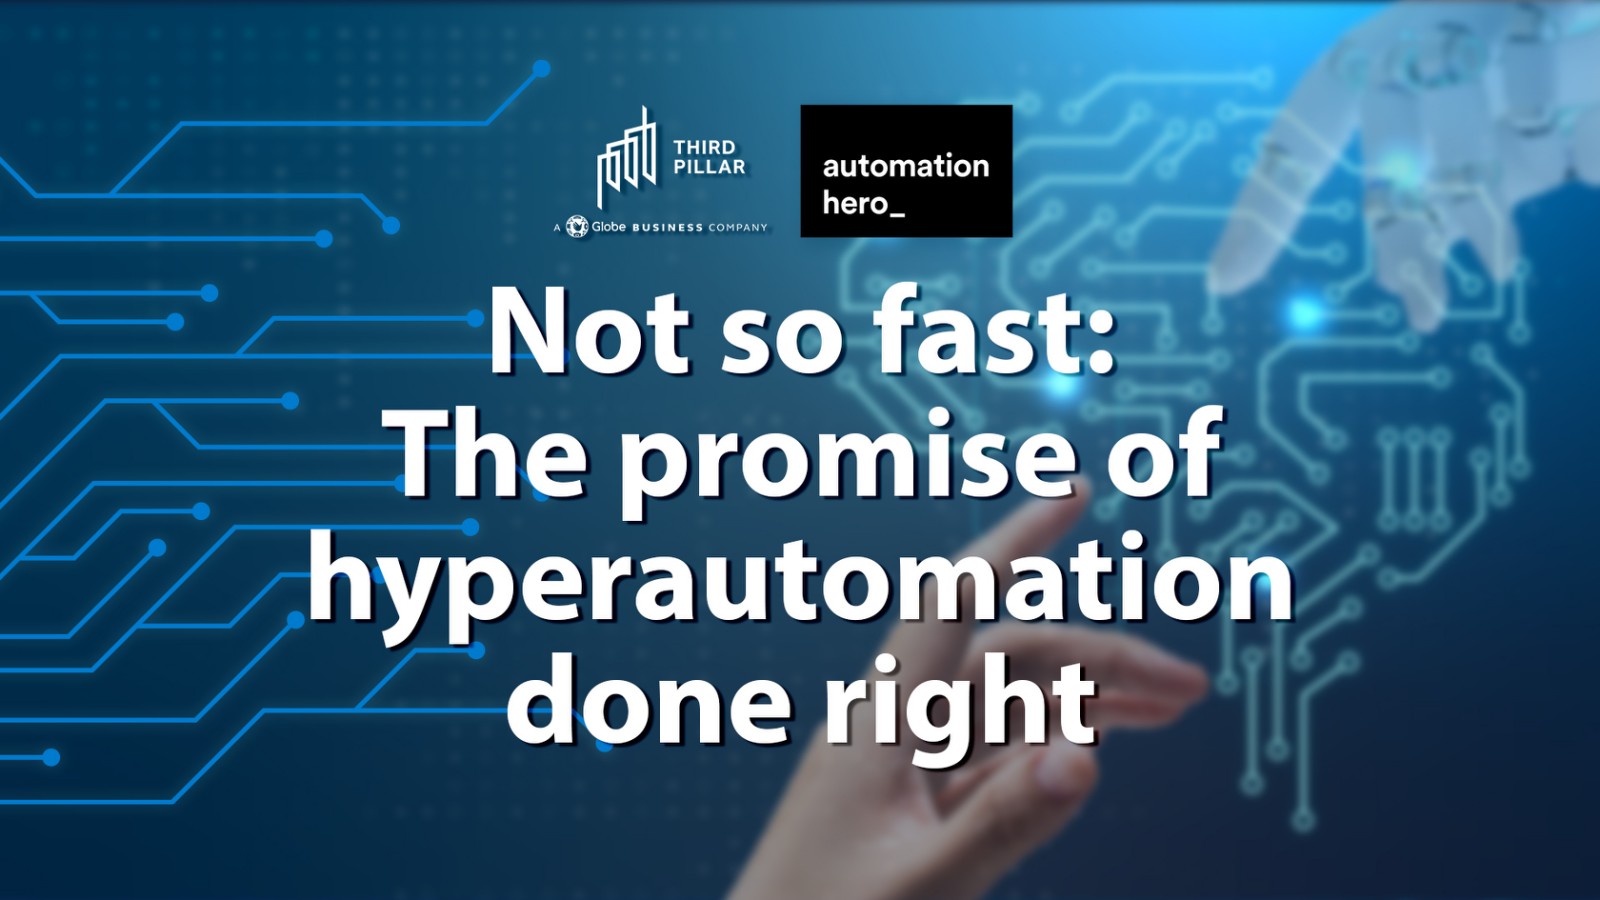 Not so fast: The promise of hyperautomation done right